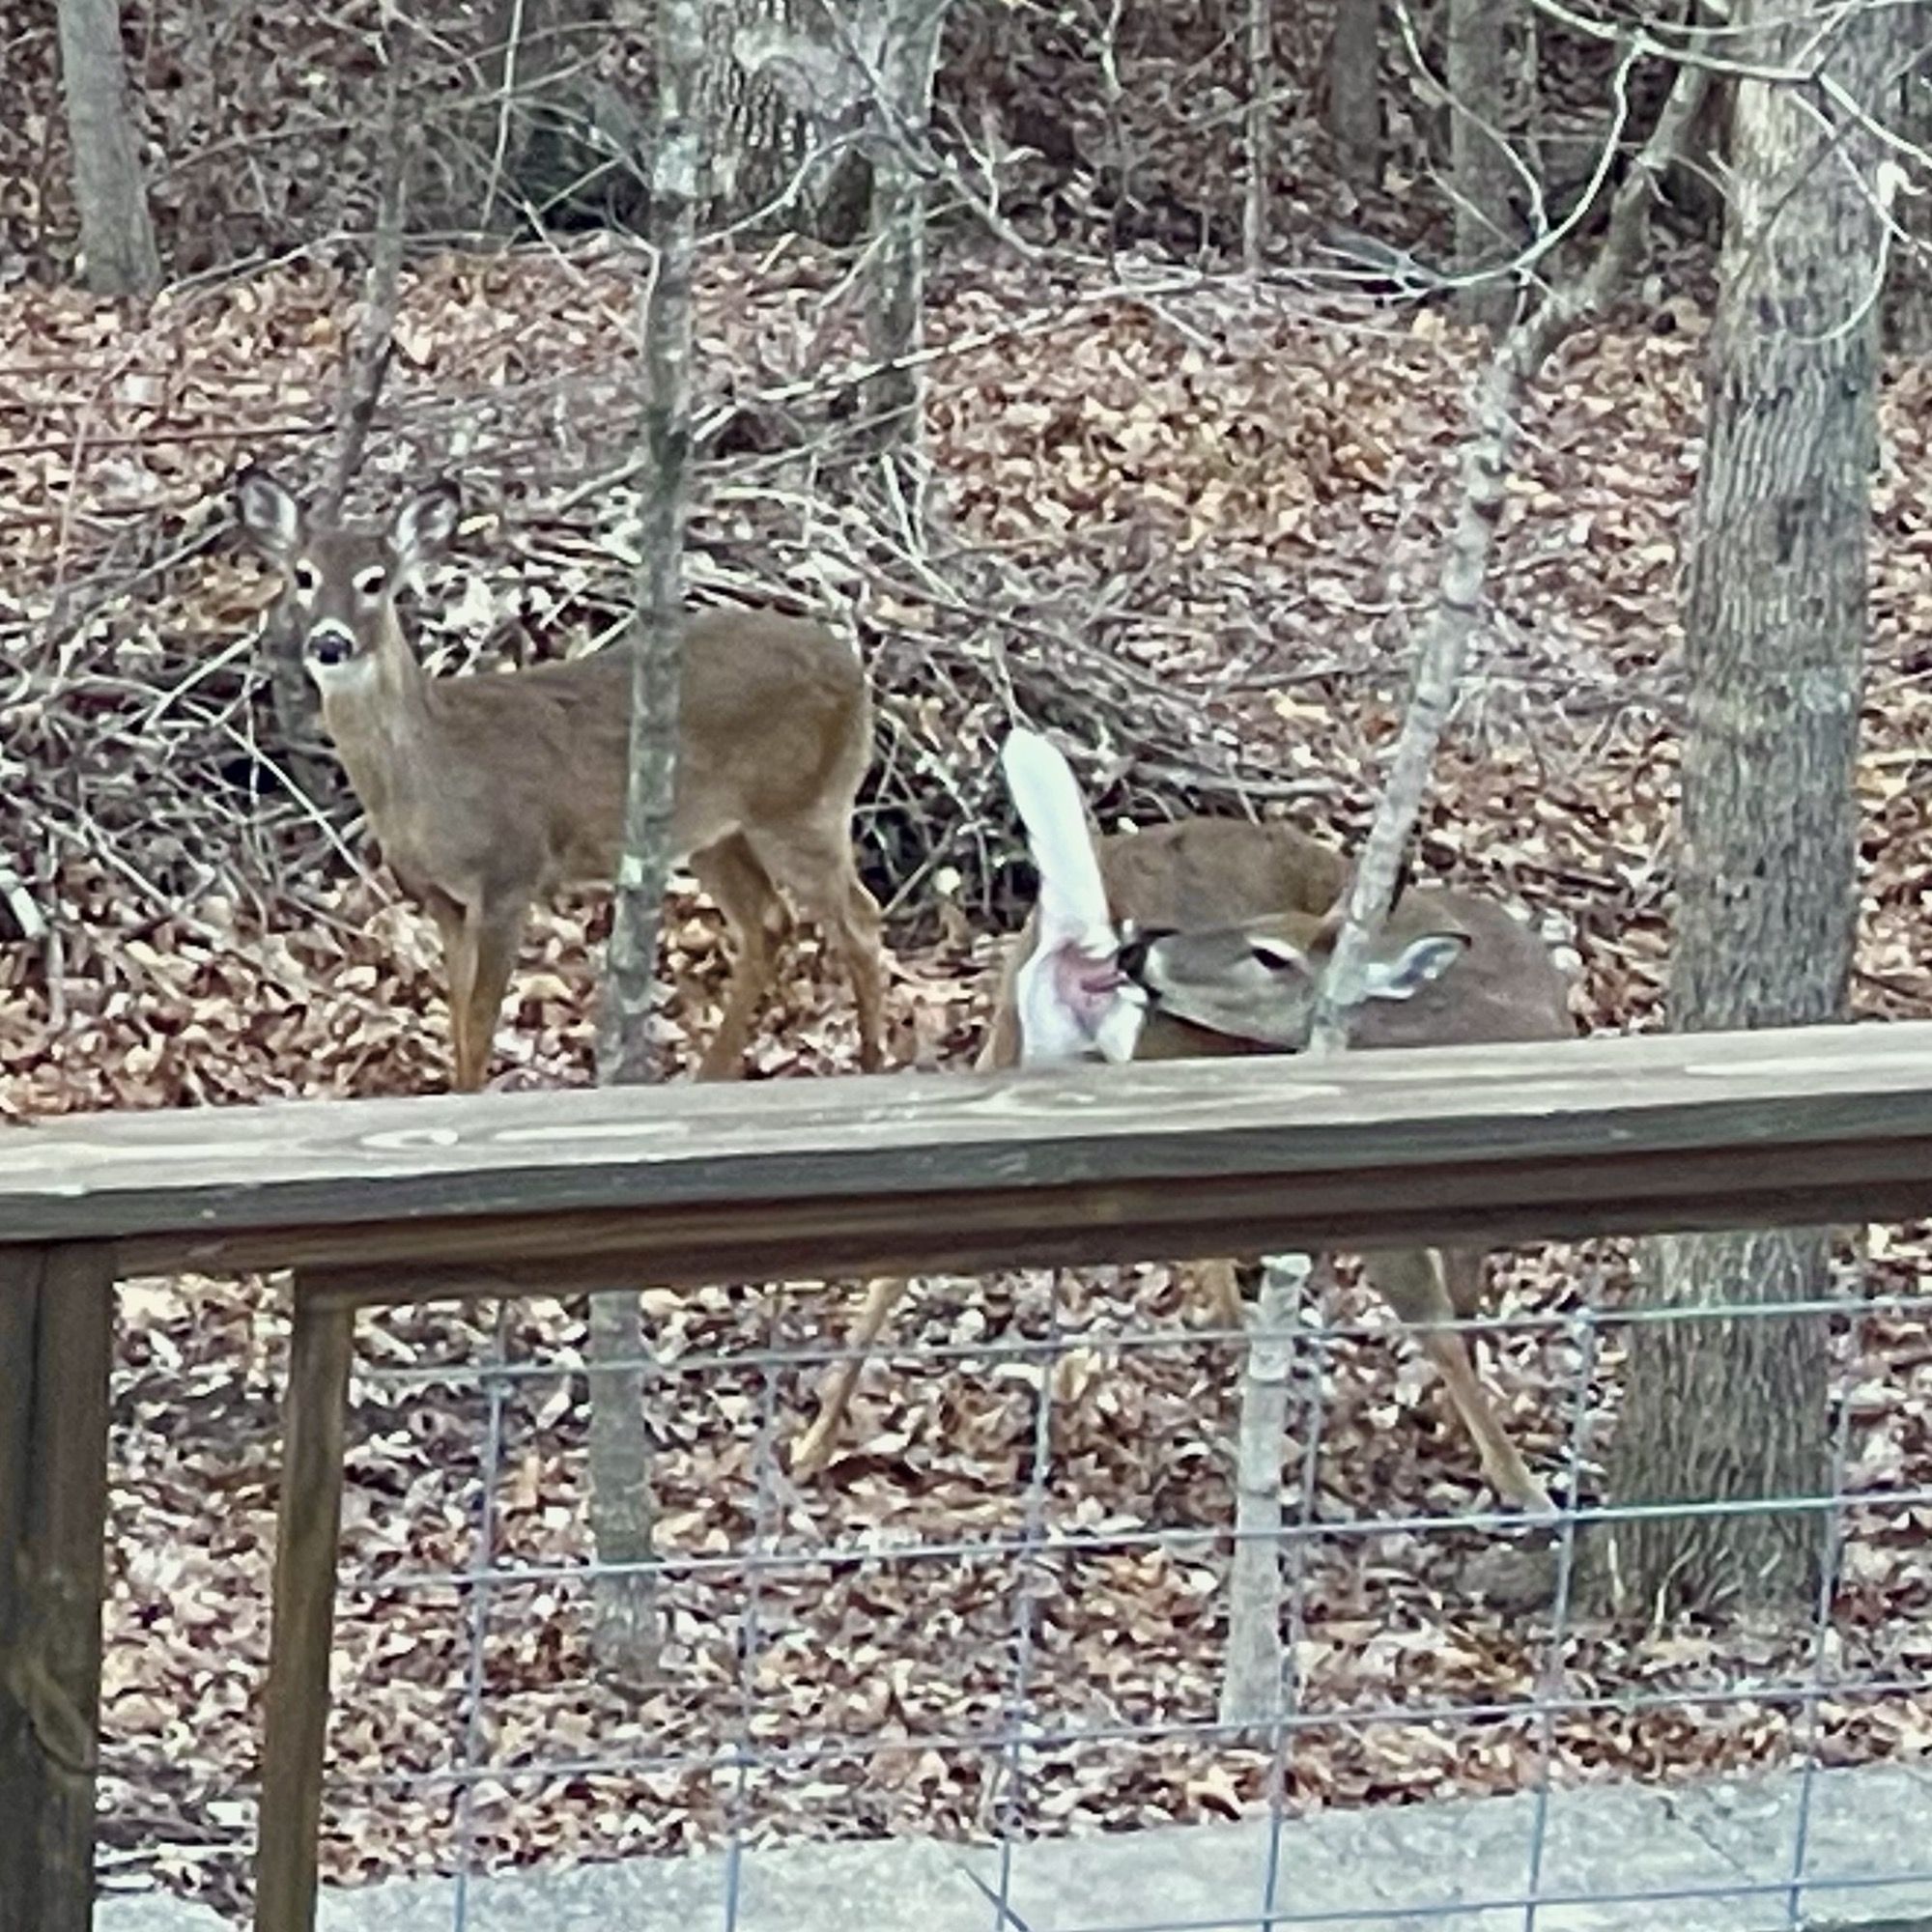 I took some pics of deer in my backyard. Shared them with friends. My wife laughed at this one and I couldn’t figure out why until I took a closer look…